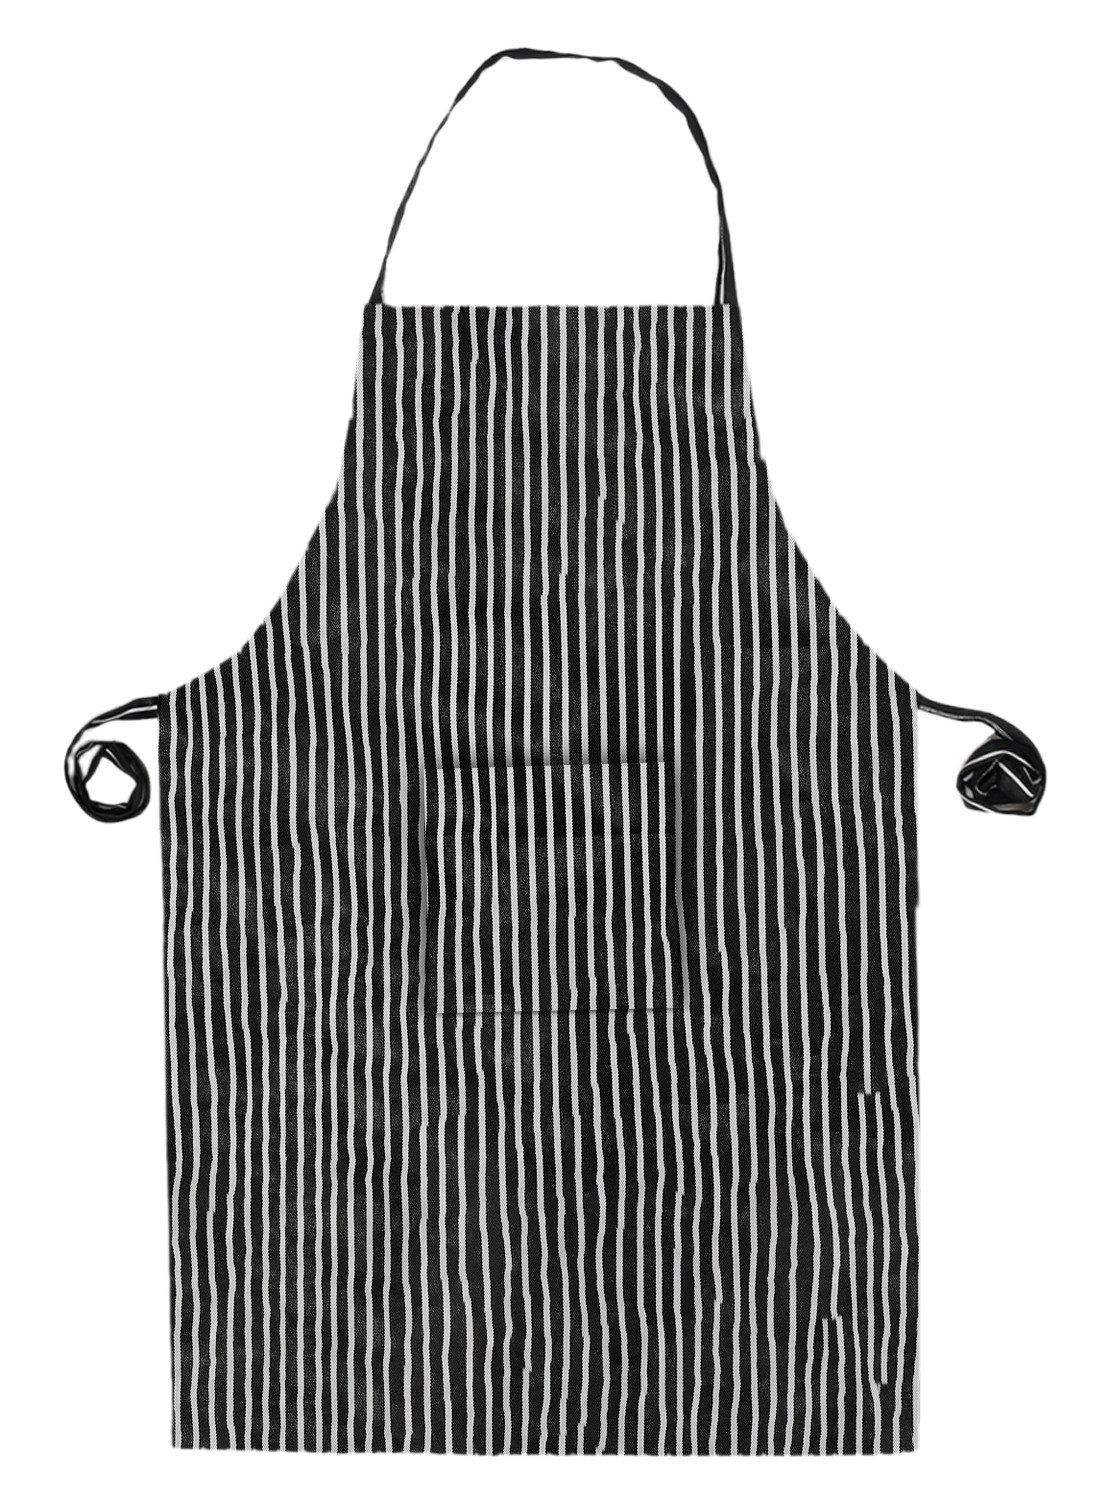 Kuber Industries Linning Printed Apron with 1 Front Pocket (Black & White)